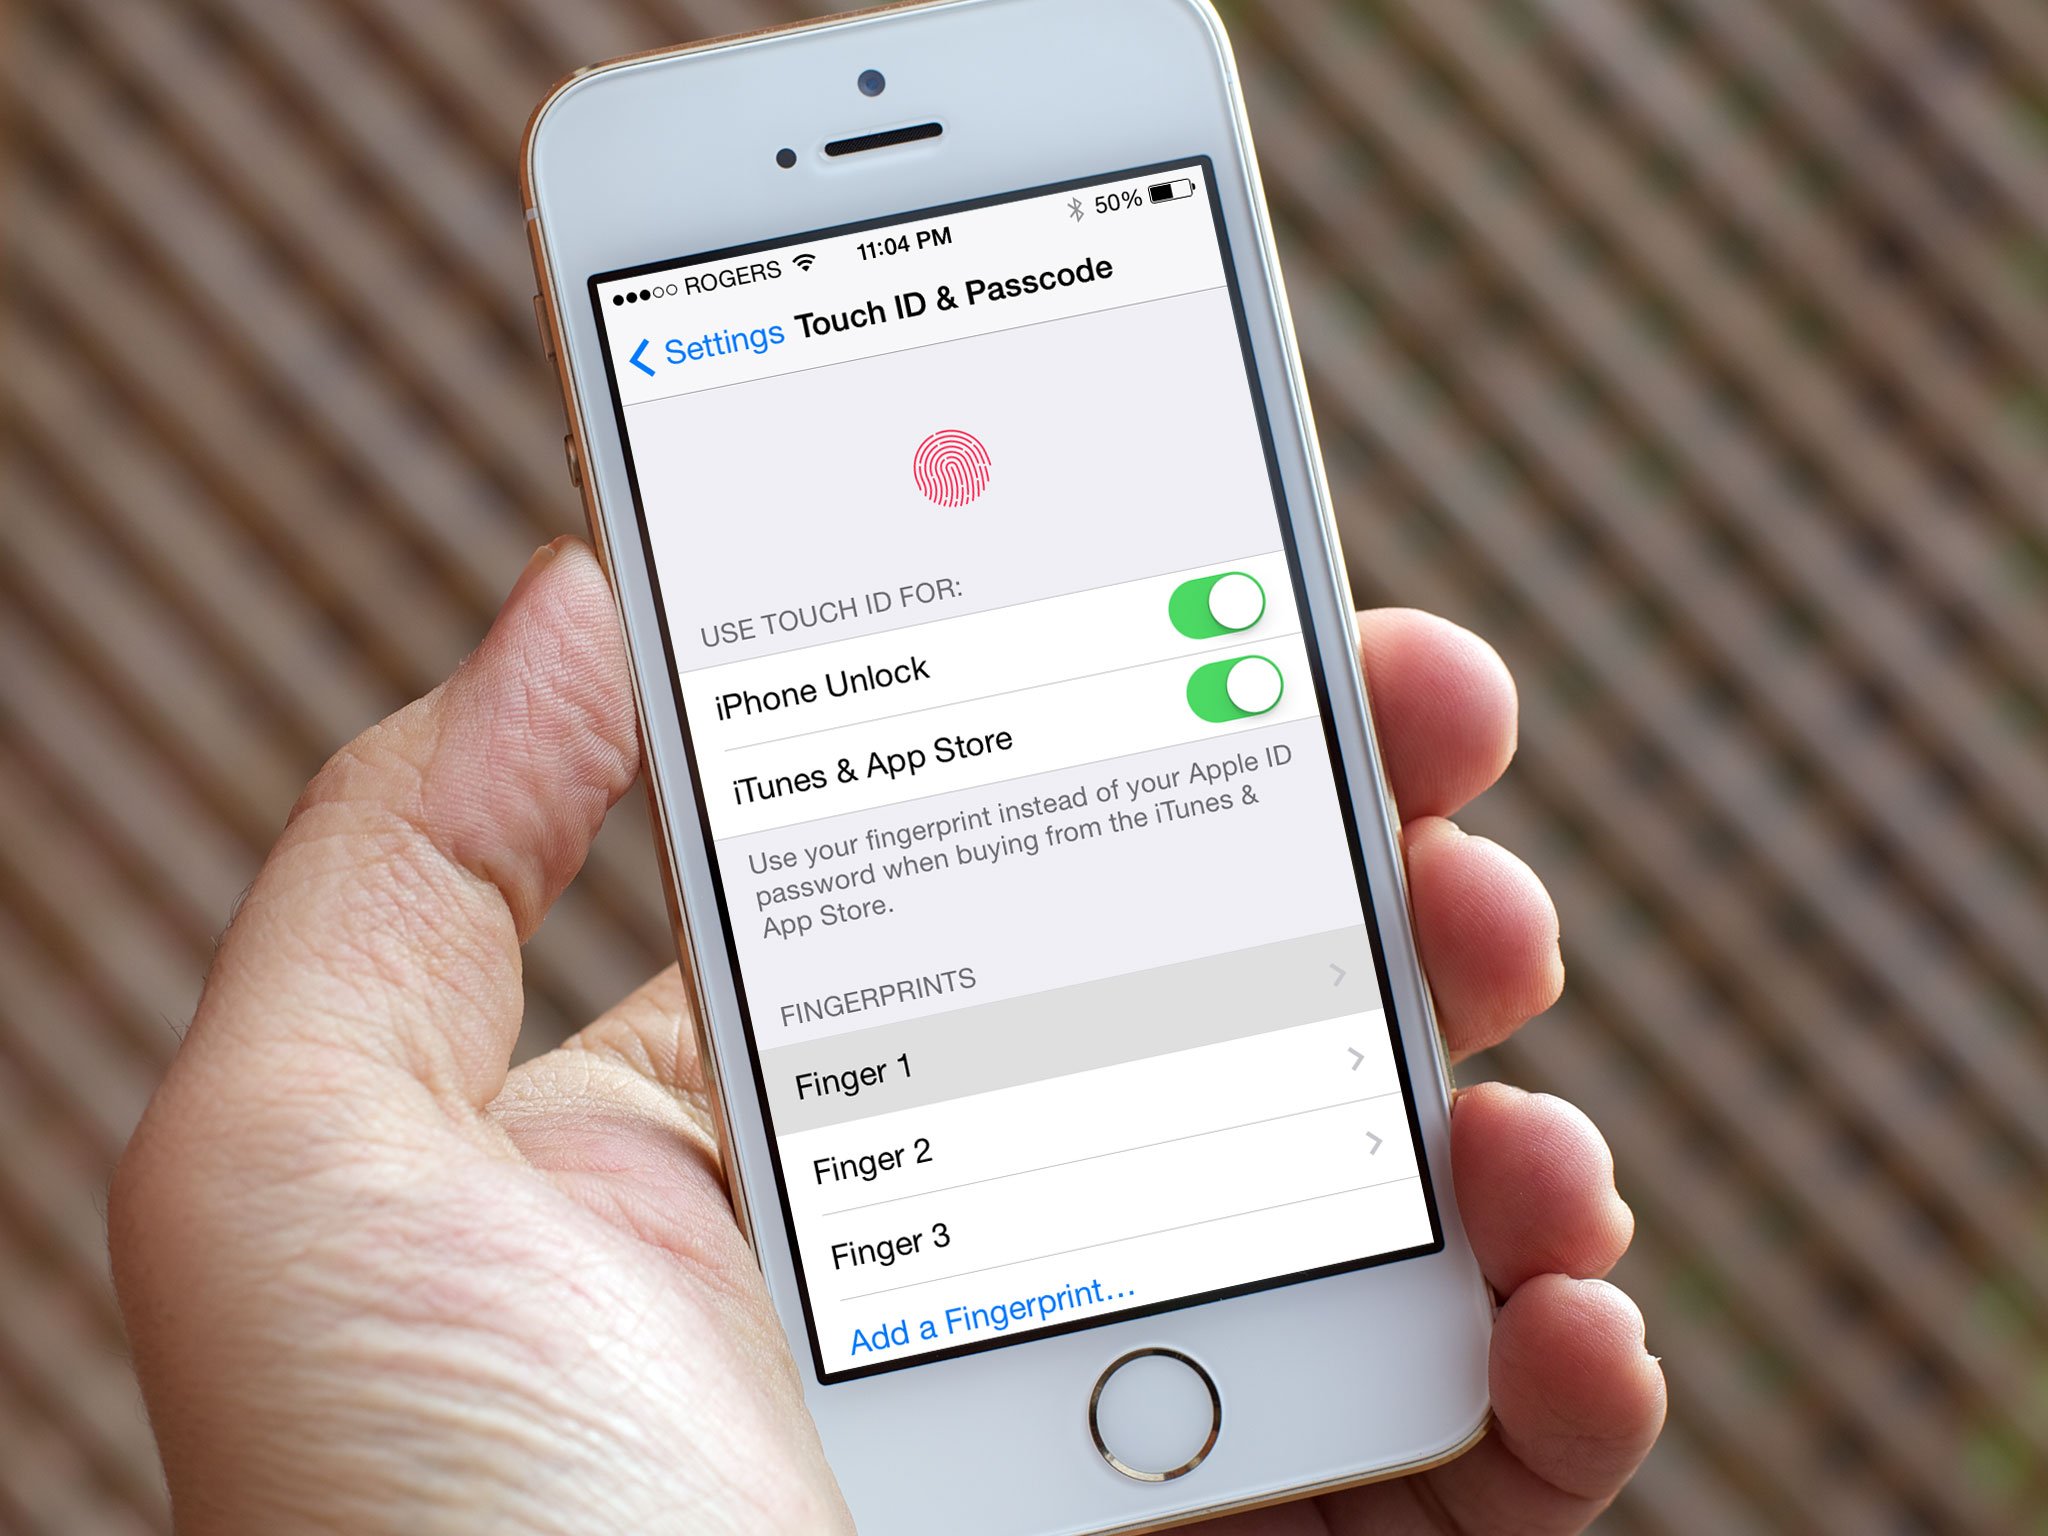 iOS 7.1 and improved Touch ID fingerprint recognition